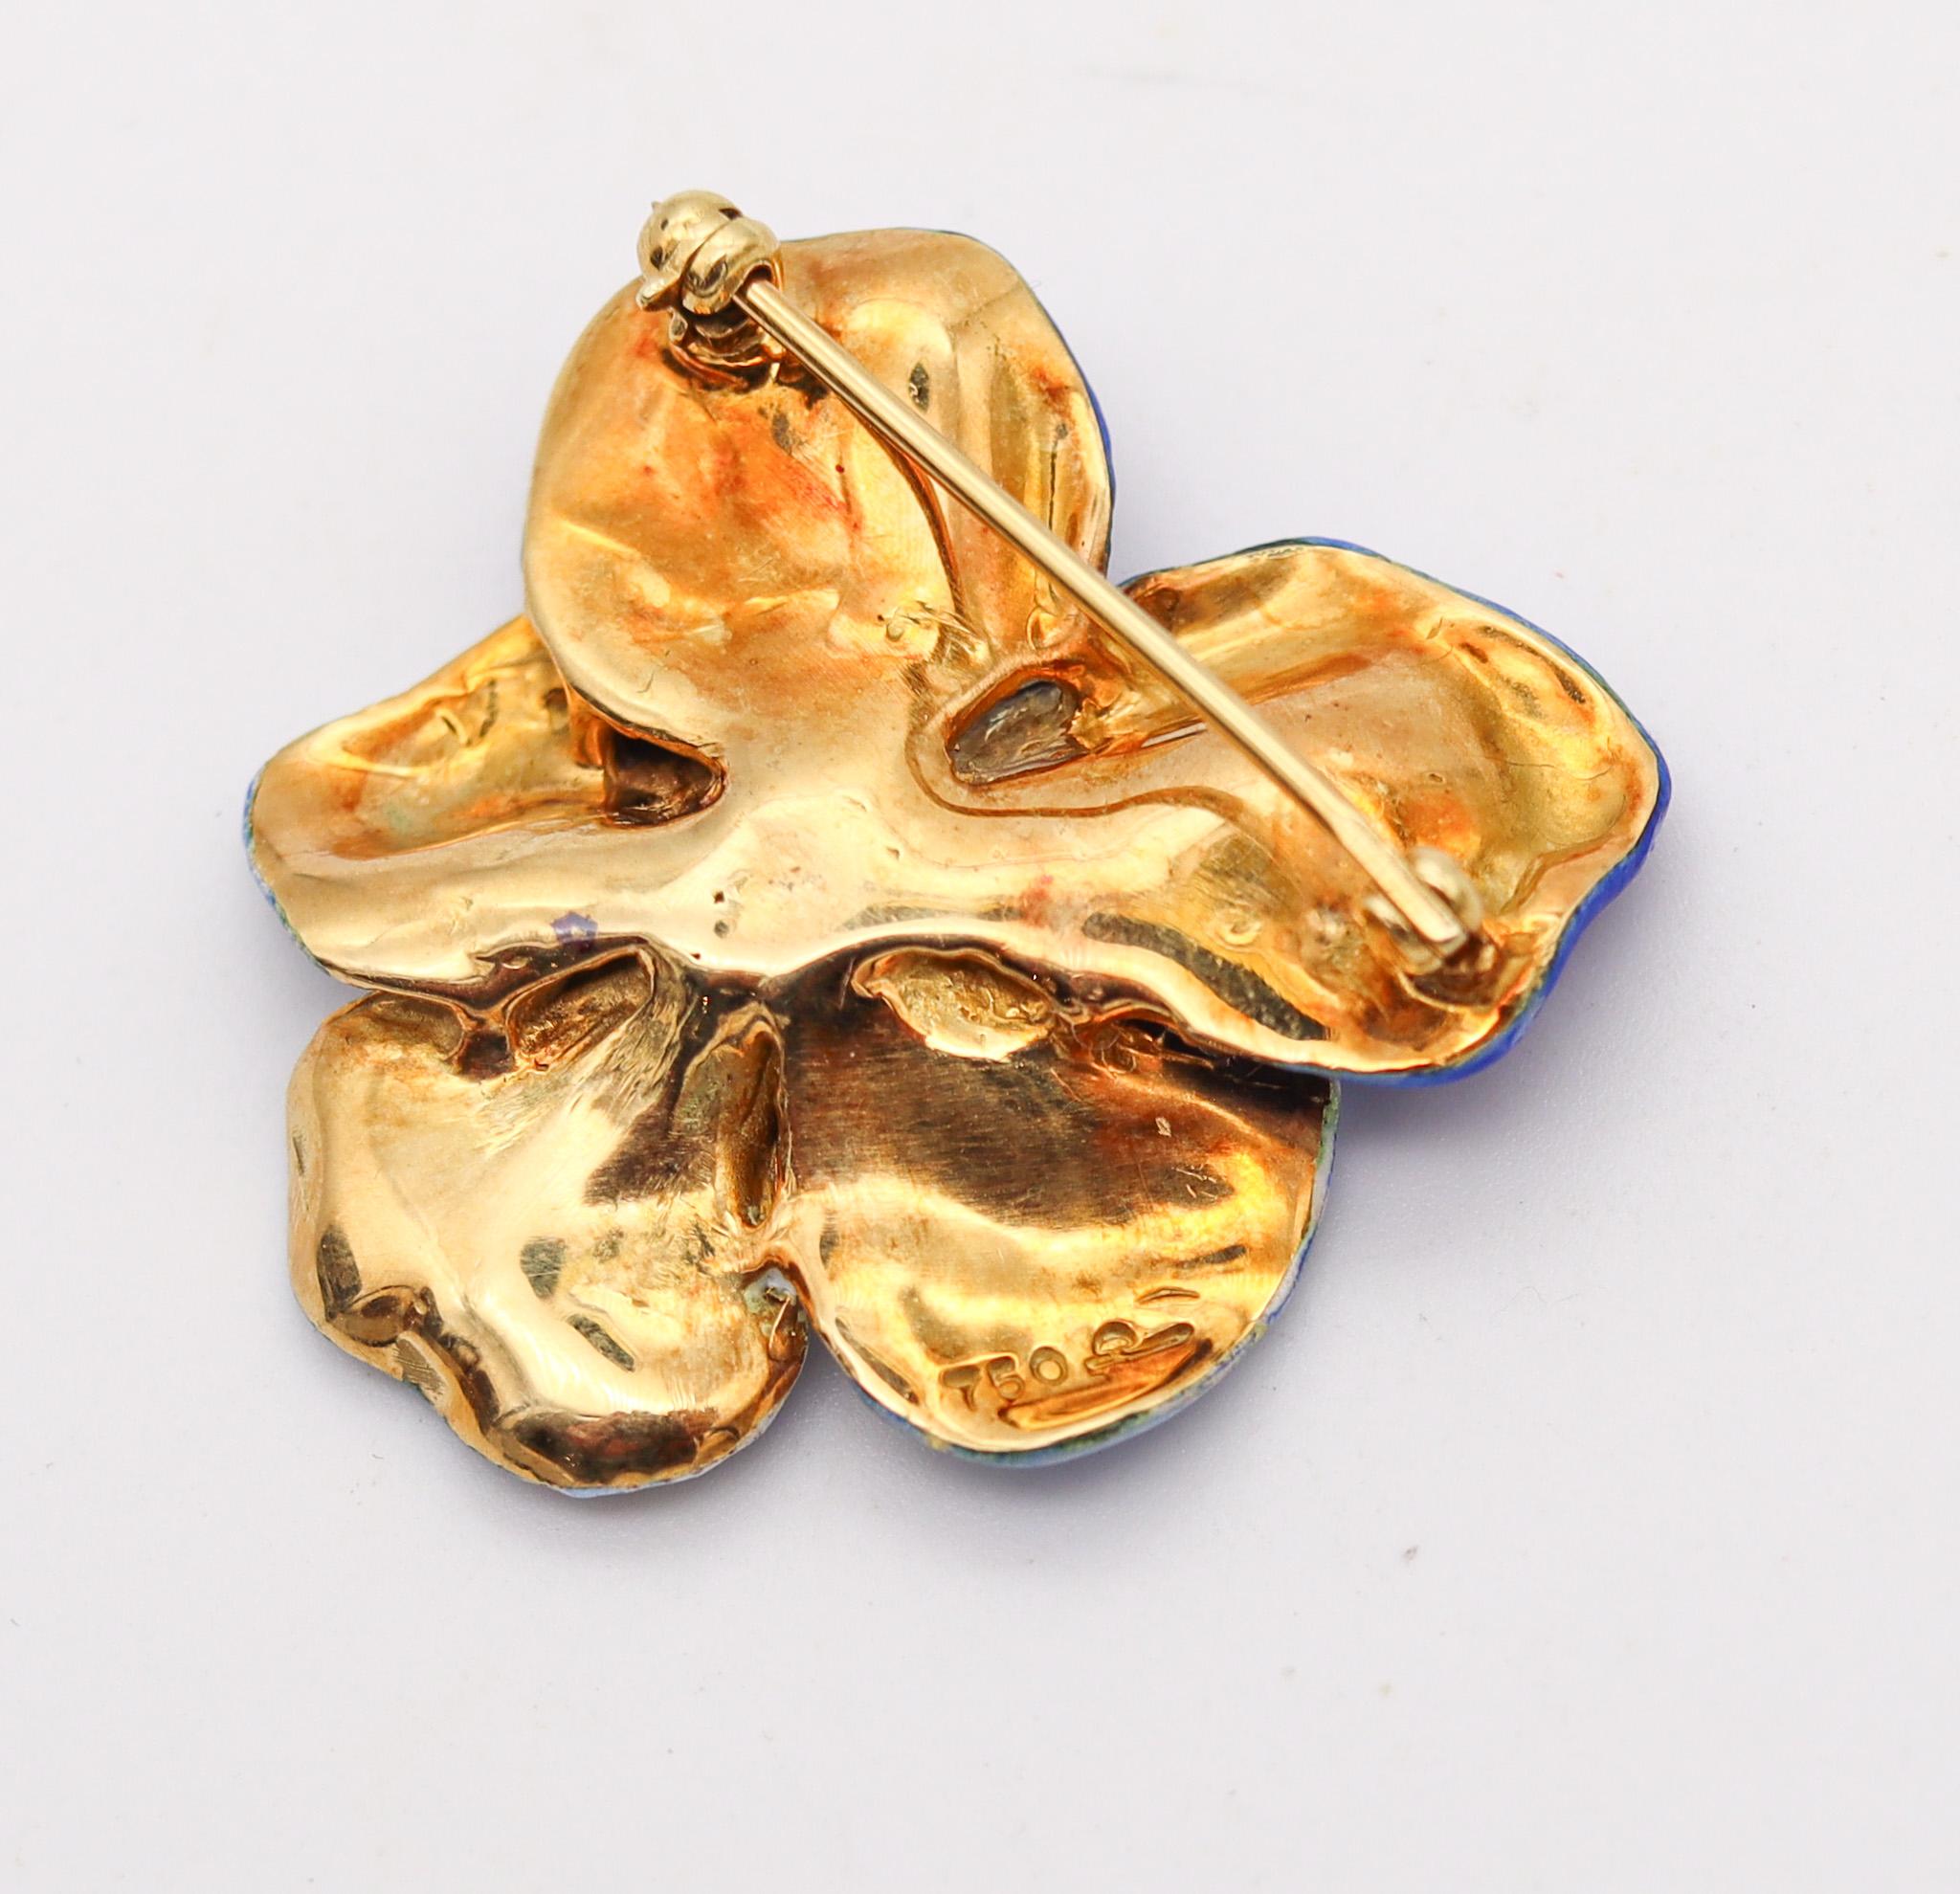 Larter & Sons 1900 Art Nouveau Enameled Pansy Flower Brooch In 18Kt Gold Diamond In Excellent Condition For Sale In Miami, FL